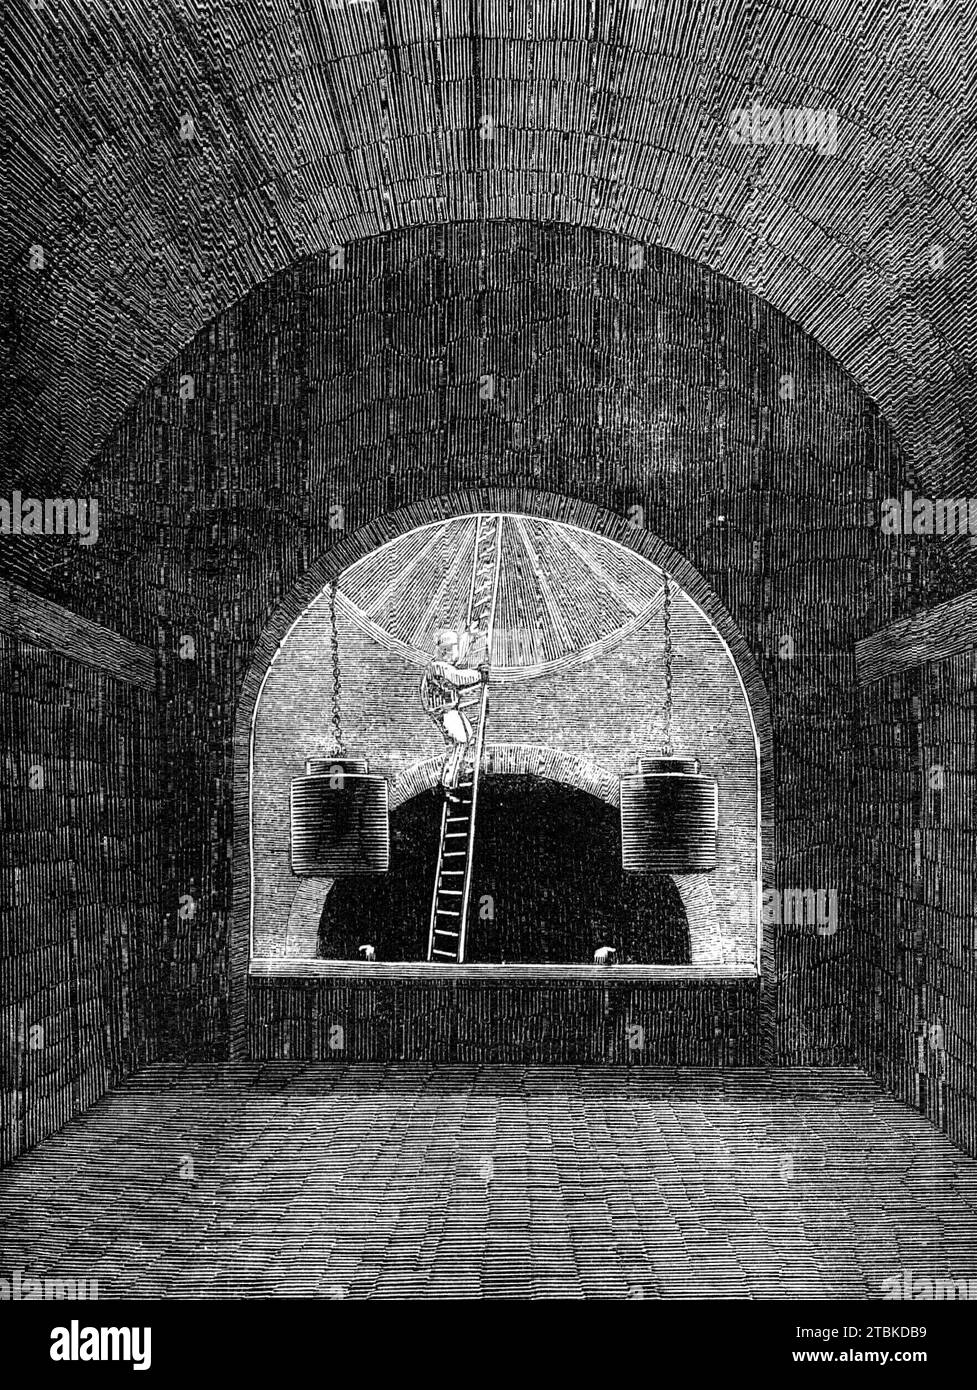 London Main Drainage: the Penstock Chamber at Old Ford, 1861. 'At Old Ford, the northern high-level, the middle-level, and the Hackney-brook sewers meet in what is called the penstock chamber. A penstock is simply a gate to regulate the passage of water through an aperture...the name of penstock has been given to the very large gates which will regulate the ebb of the drainage waters coming down from a large part of the northern district of London...The waters, having arrived in it from the high and middle level sewers, will pass through the large arched passage in the foreground of the Sketch Stock Photo